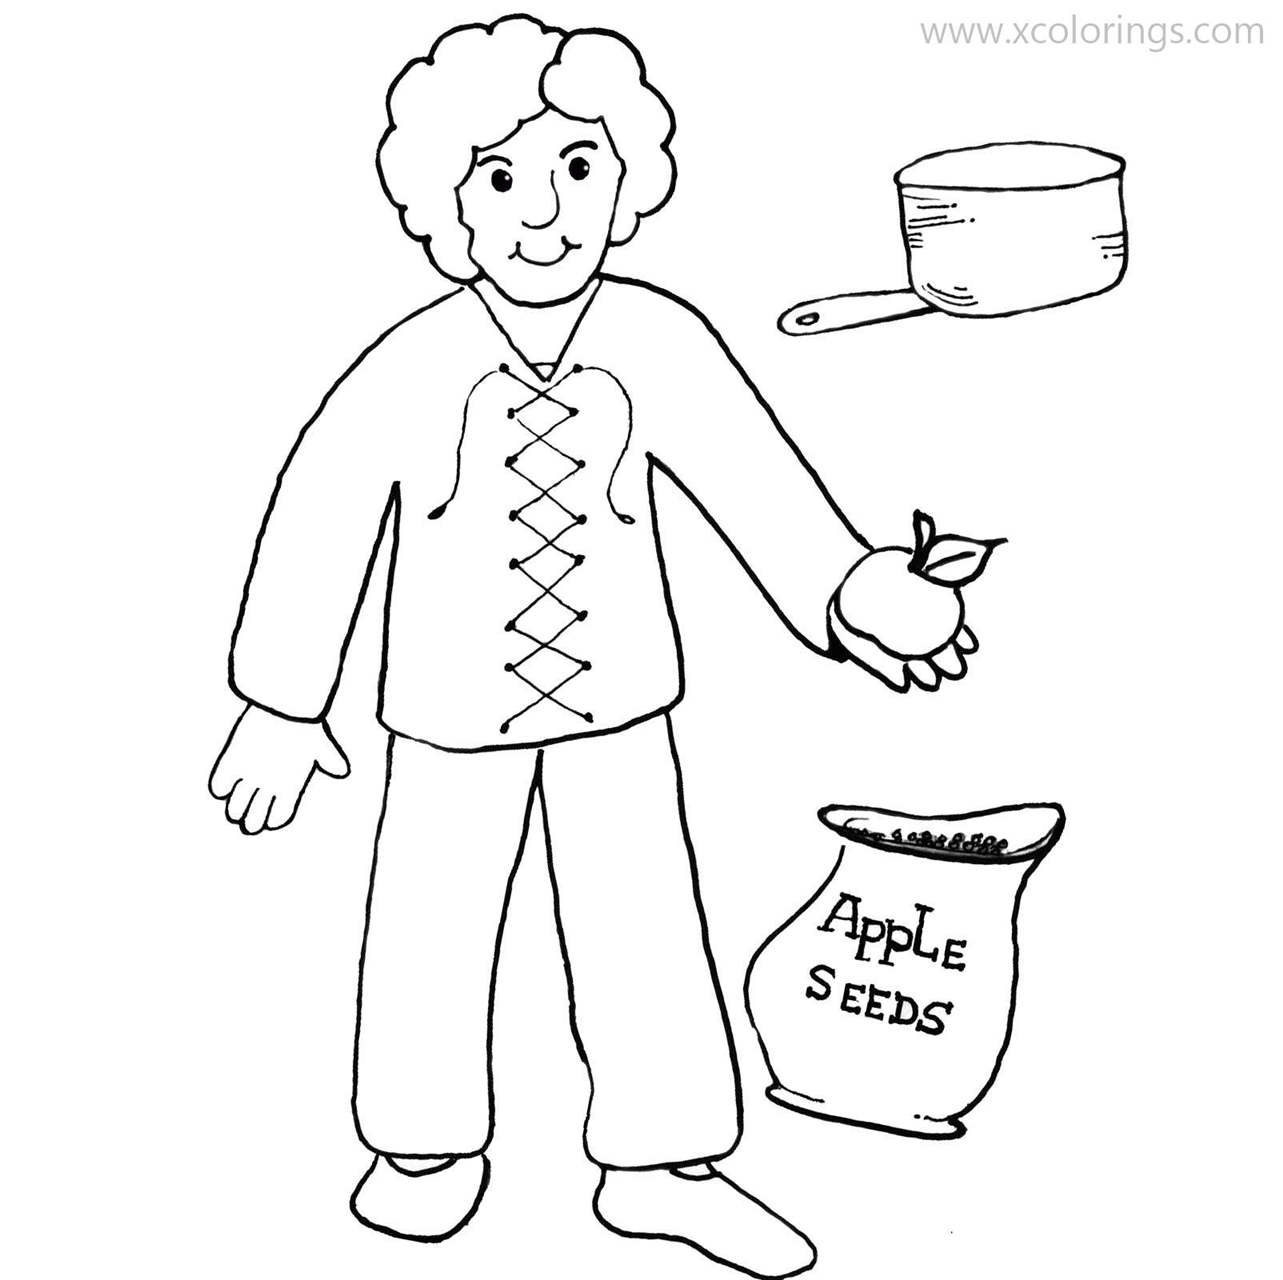 Free Johnny Appleseed Coloring Pages with Apple Seeds printable